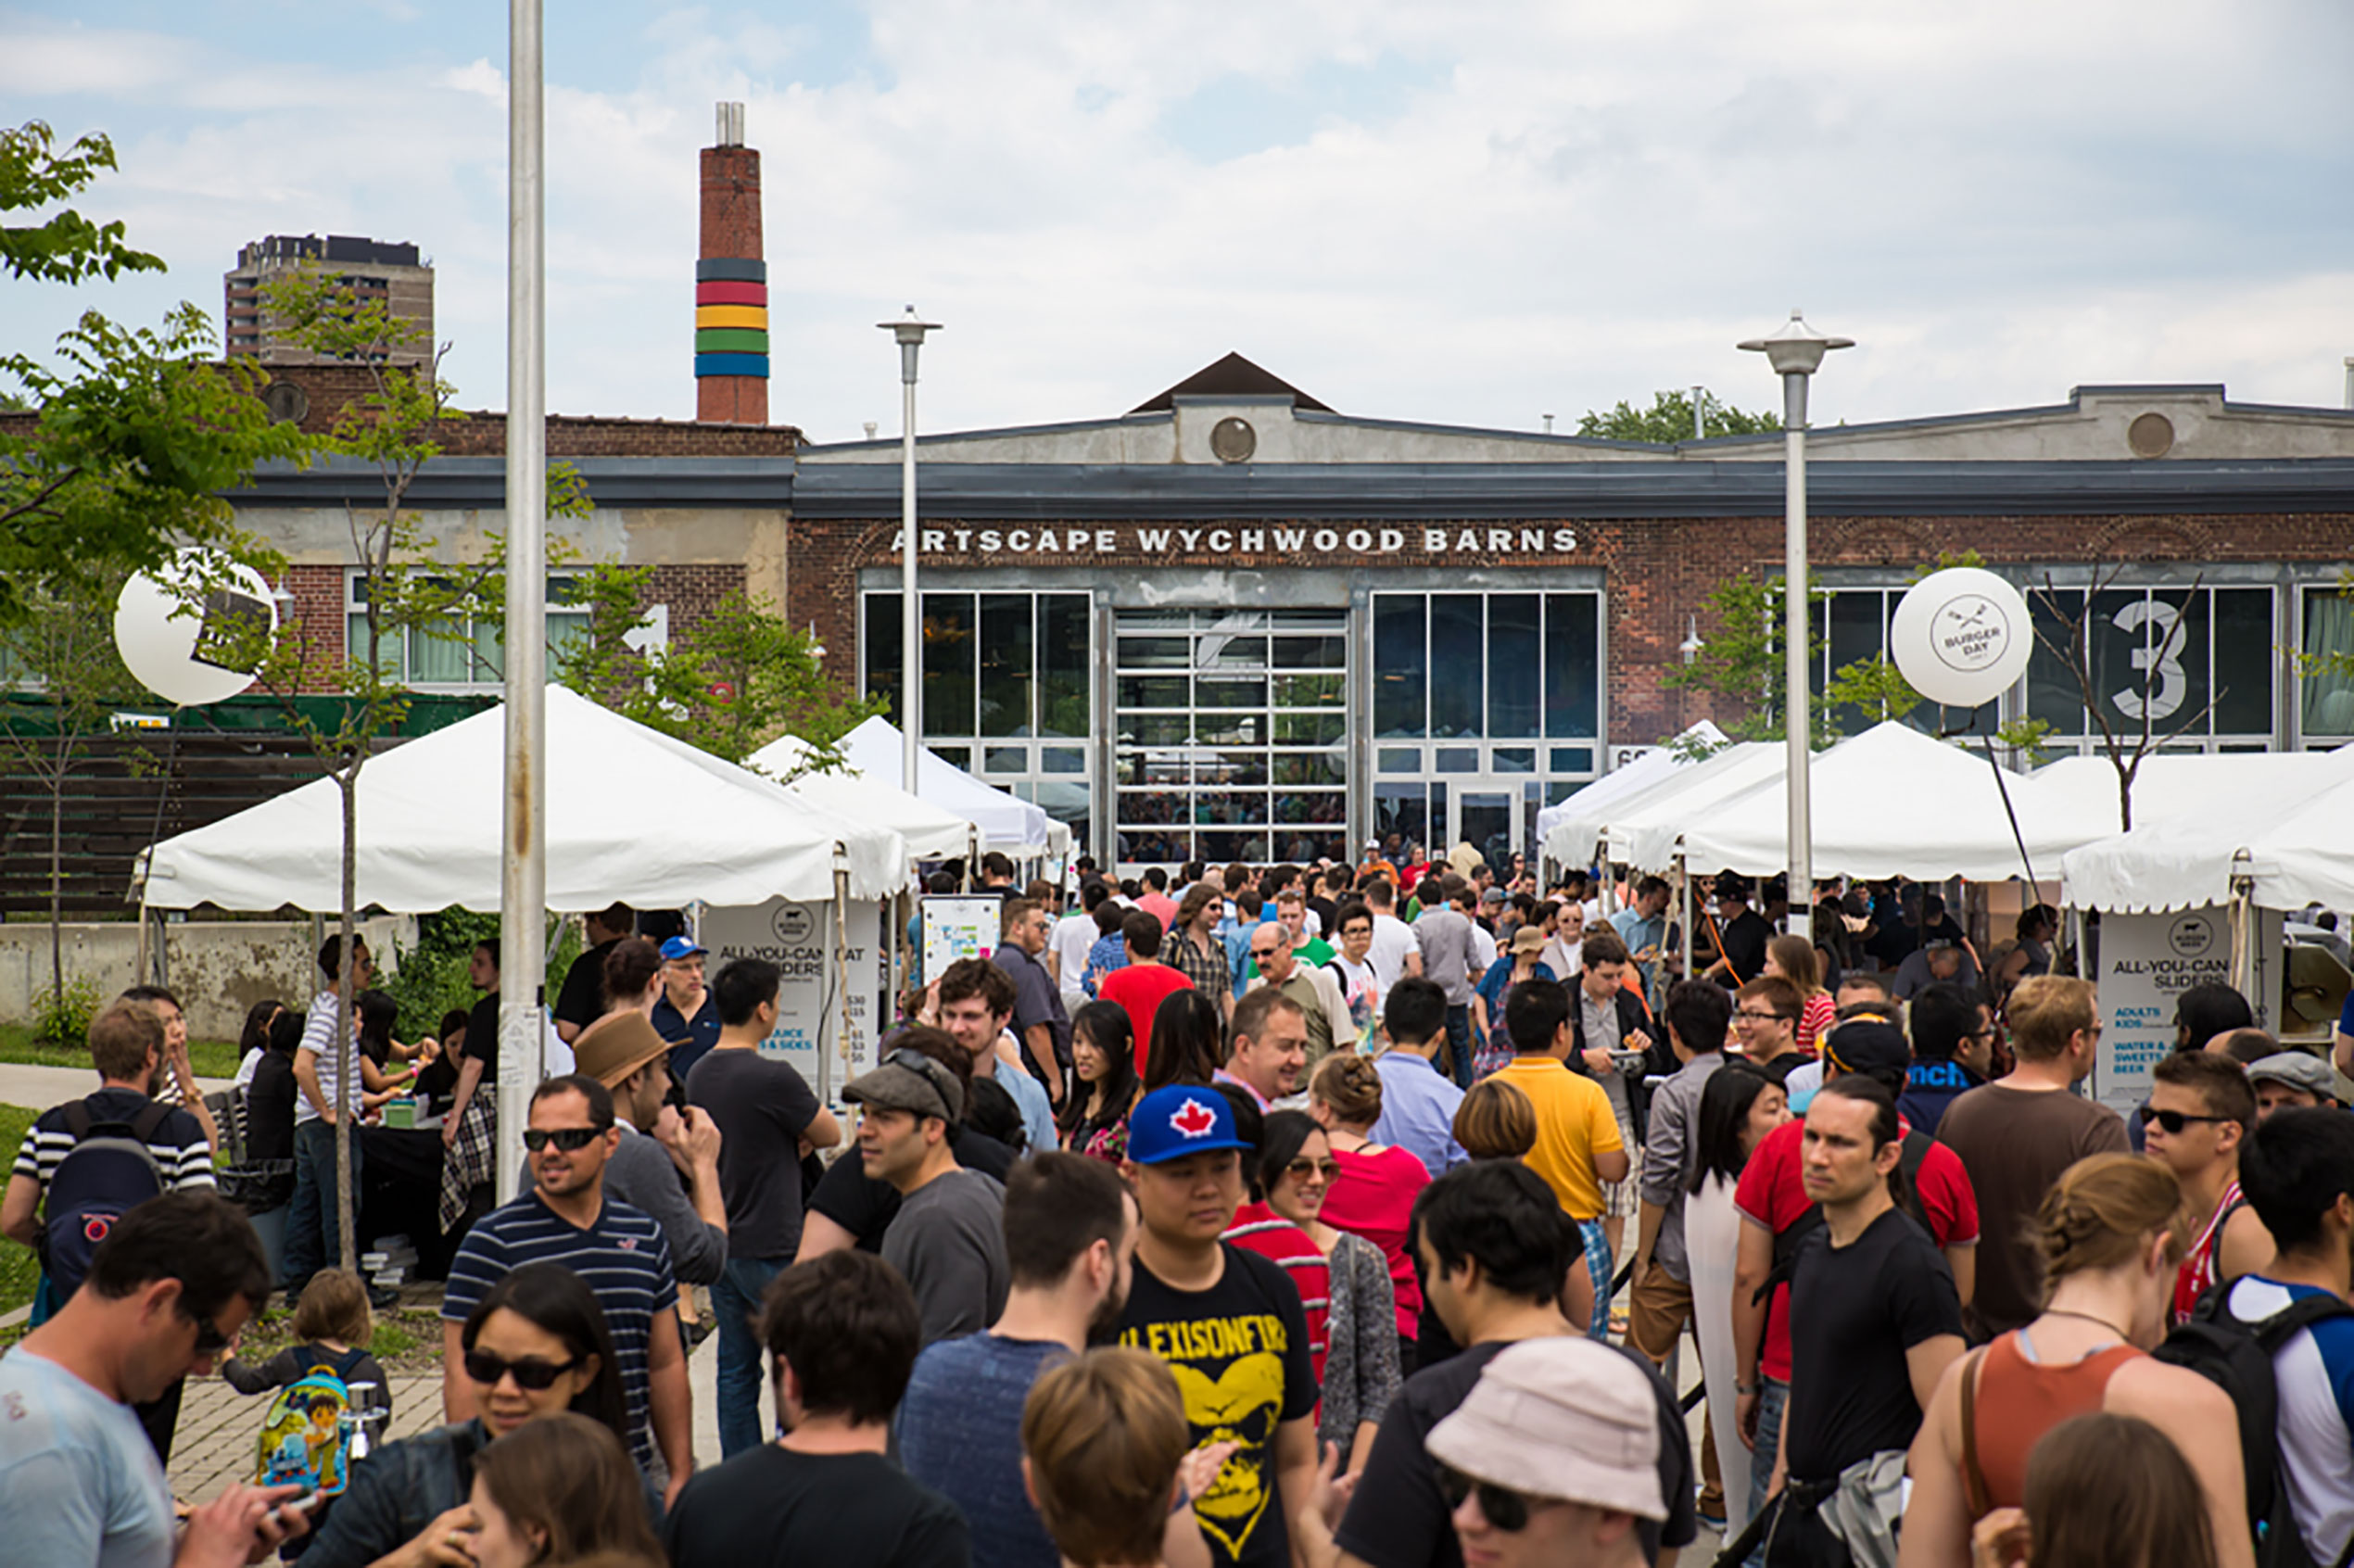 A crowd gathers at the opening of Artscape Wychwood Barns